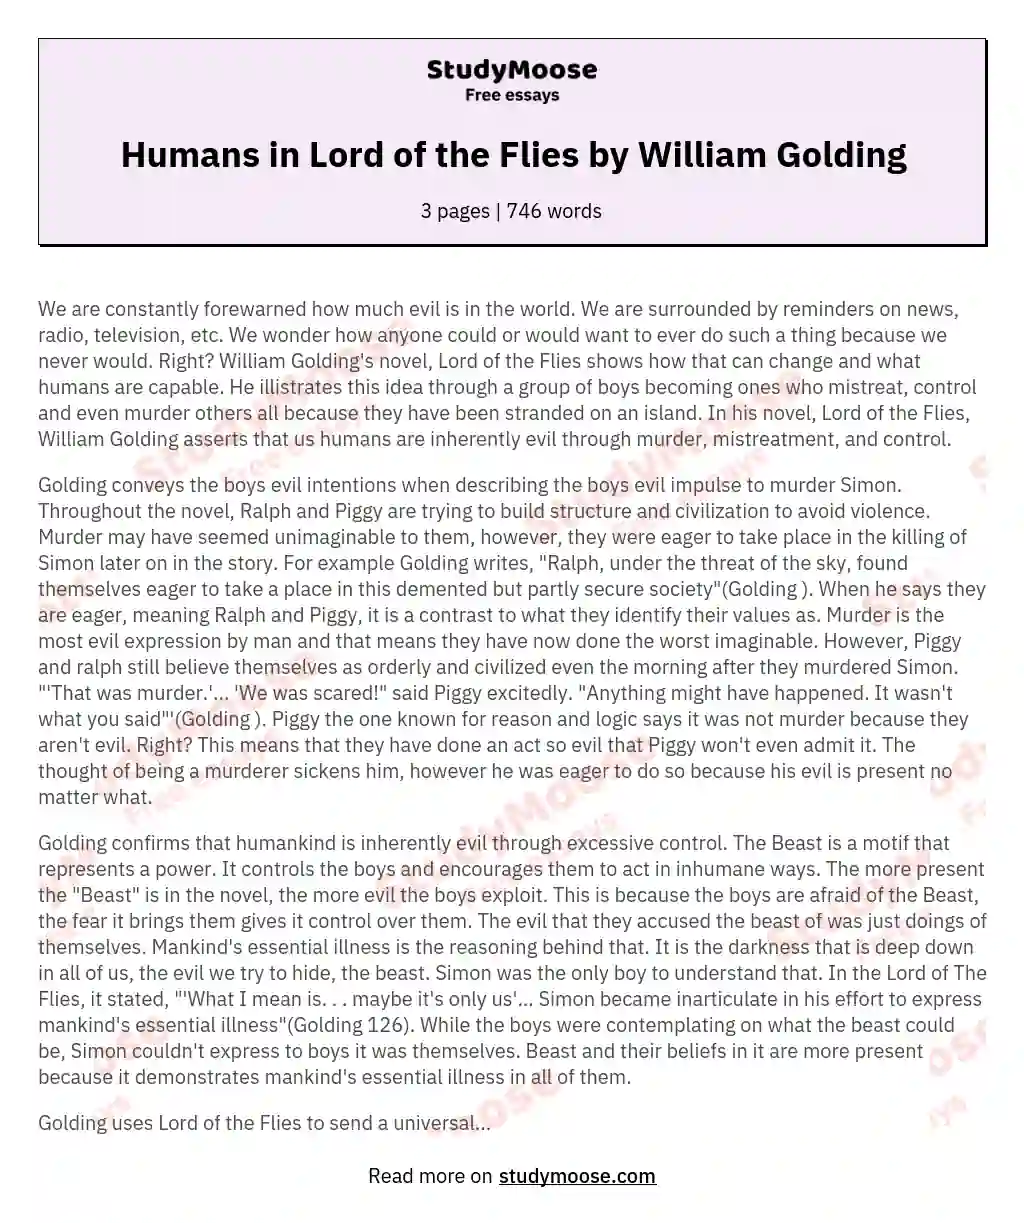 Humans in Lord of the Flies by William Golding